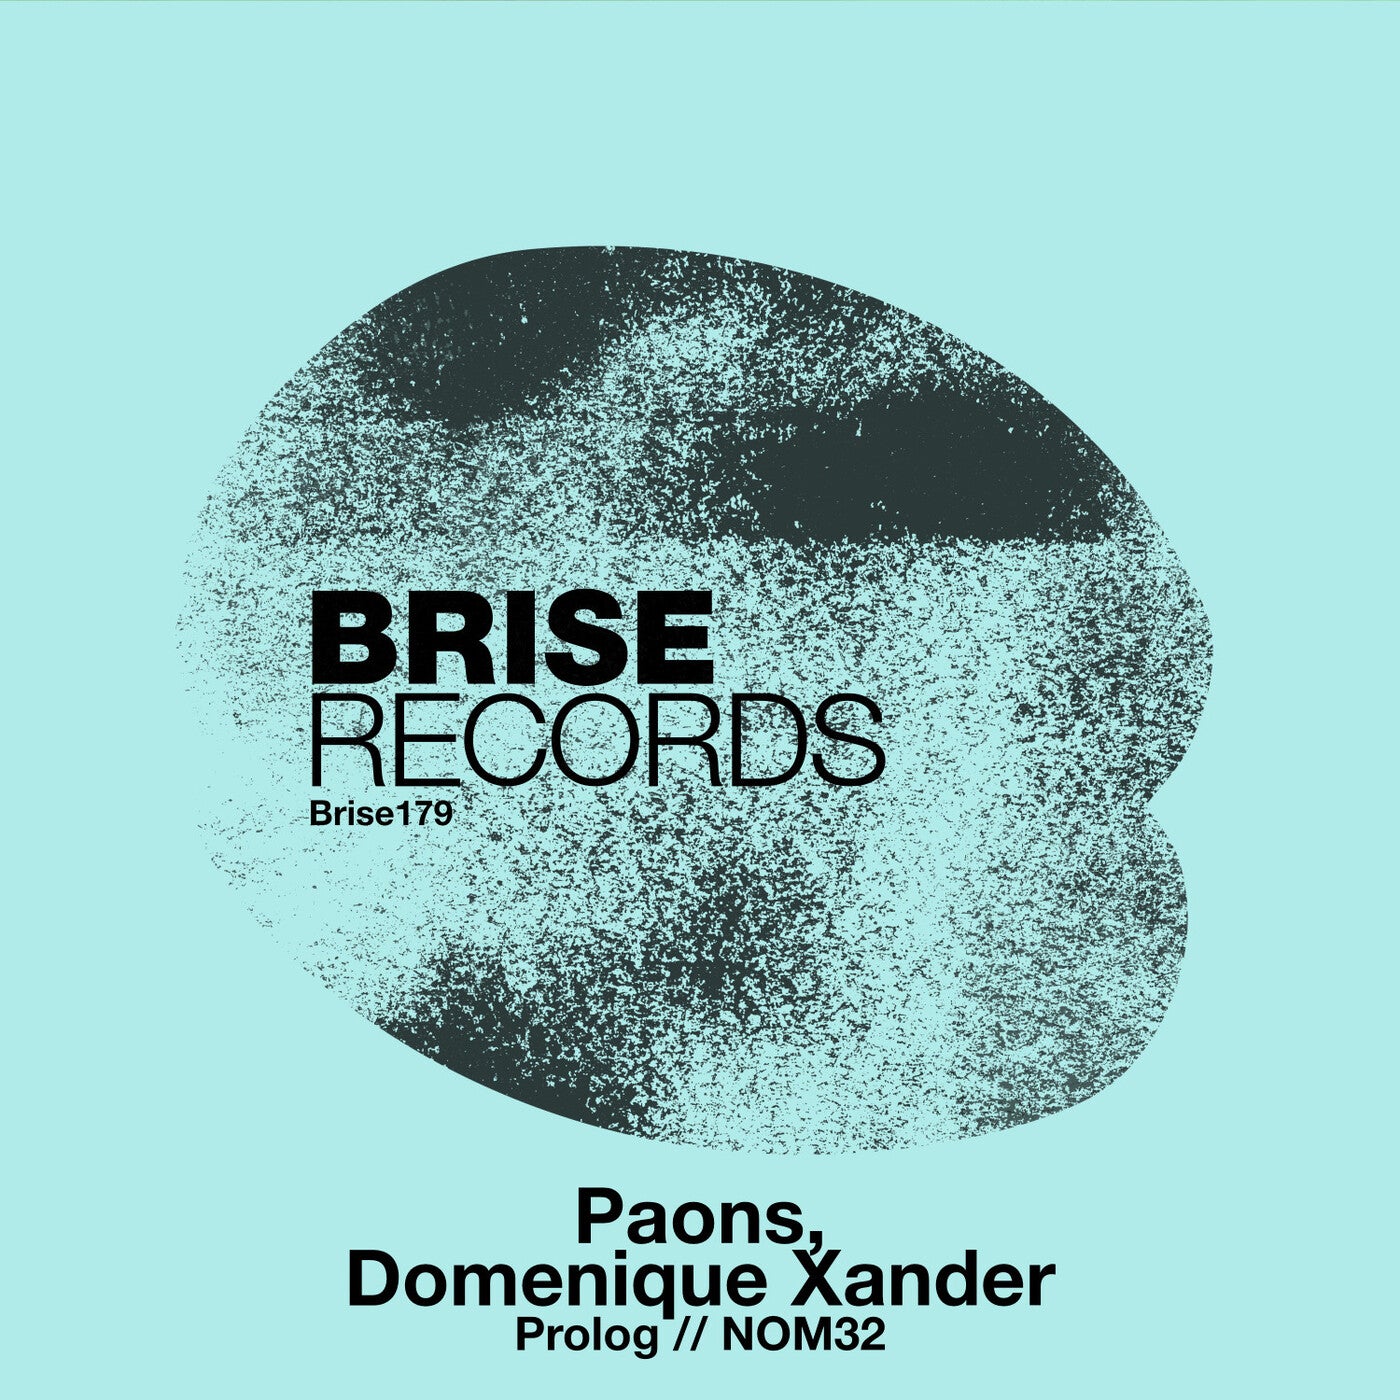 image cover: Domenique Xander & Paons - Prolog / NOM32 on Brise Records